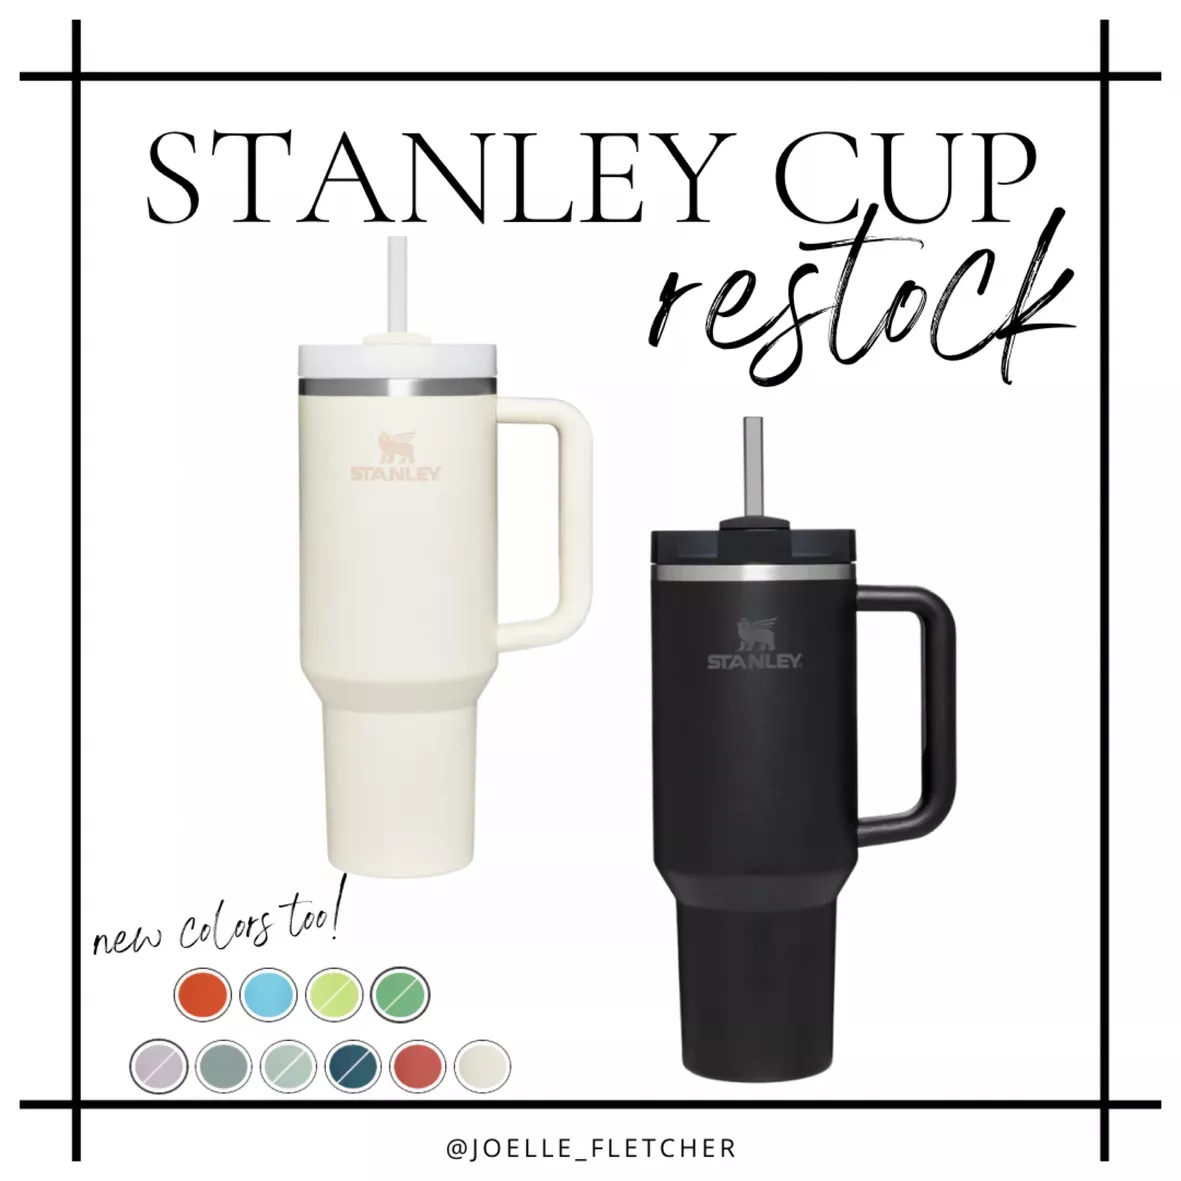 Stanley Quencher Adventure Tumbler Restock Guide: New Colors! - The Krazy  Coupon Lady